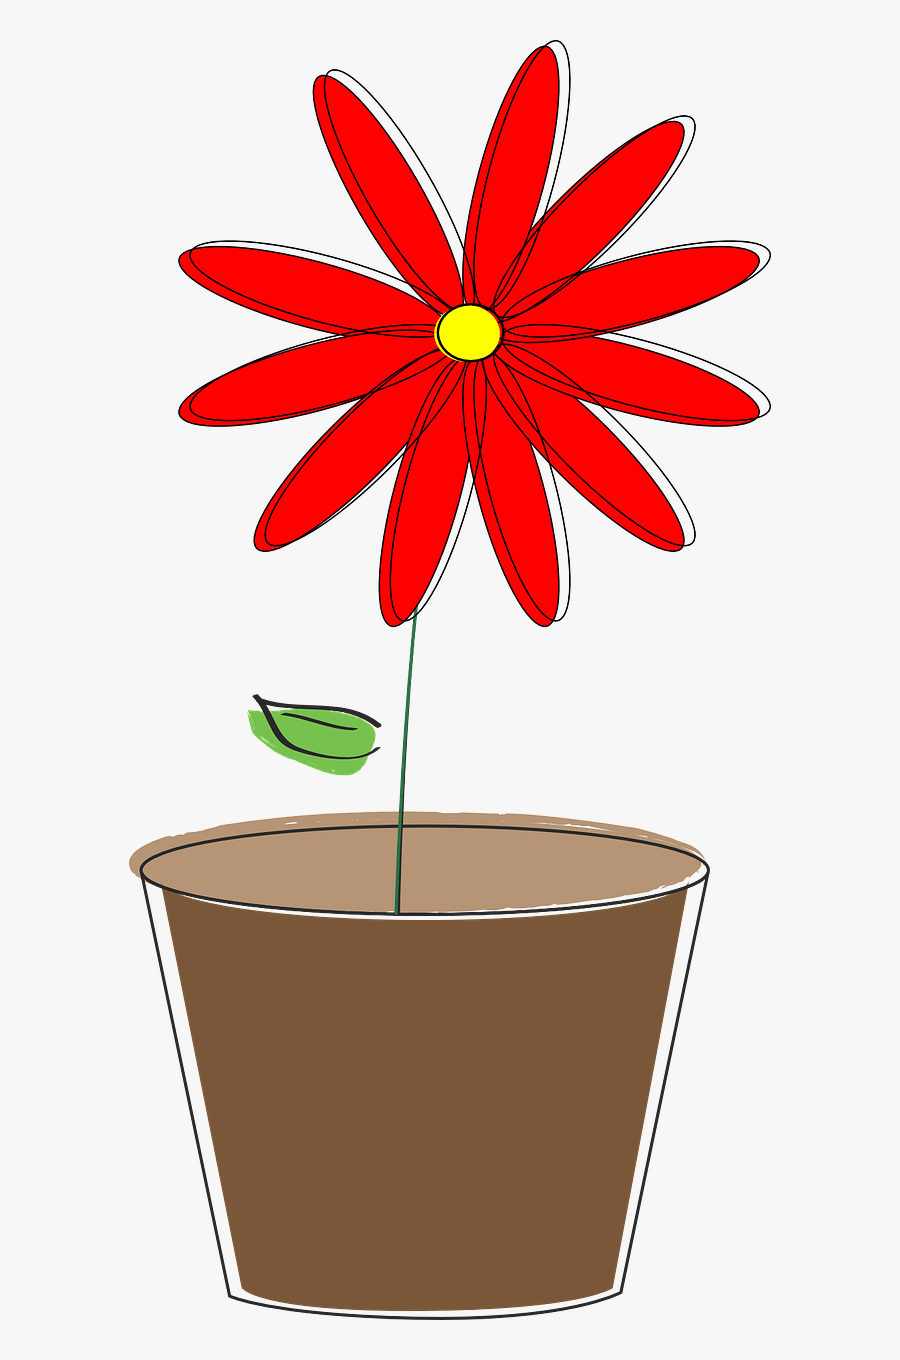 Potted Plant Flower Daisy Free Picture - Karuna Himalaya , Free ...